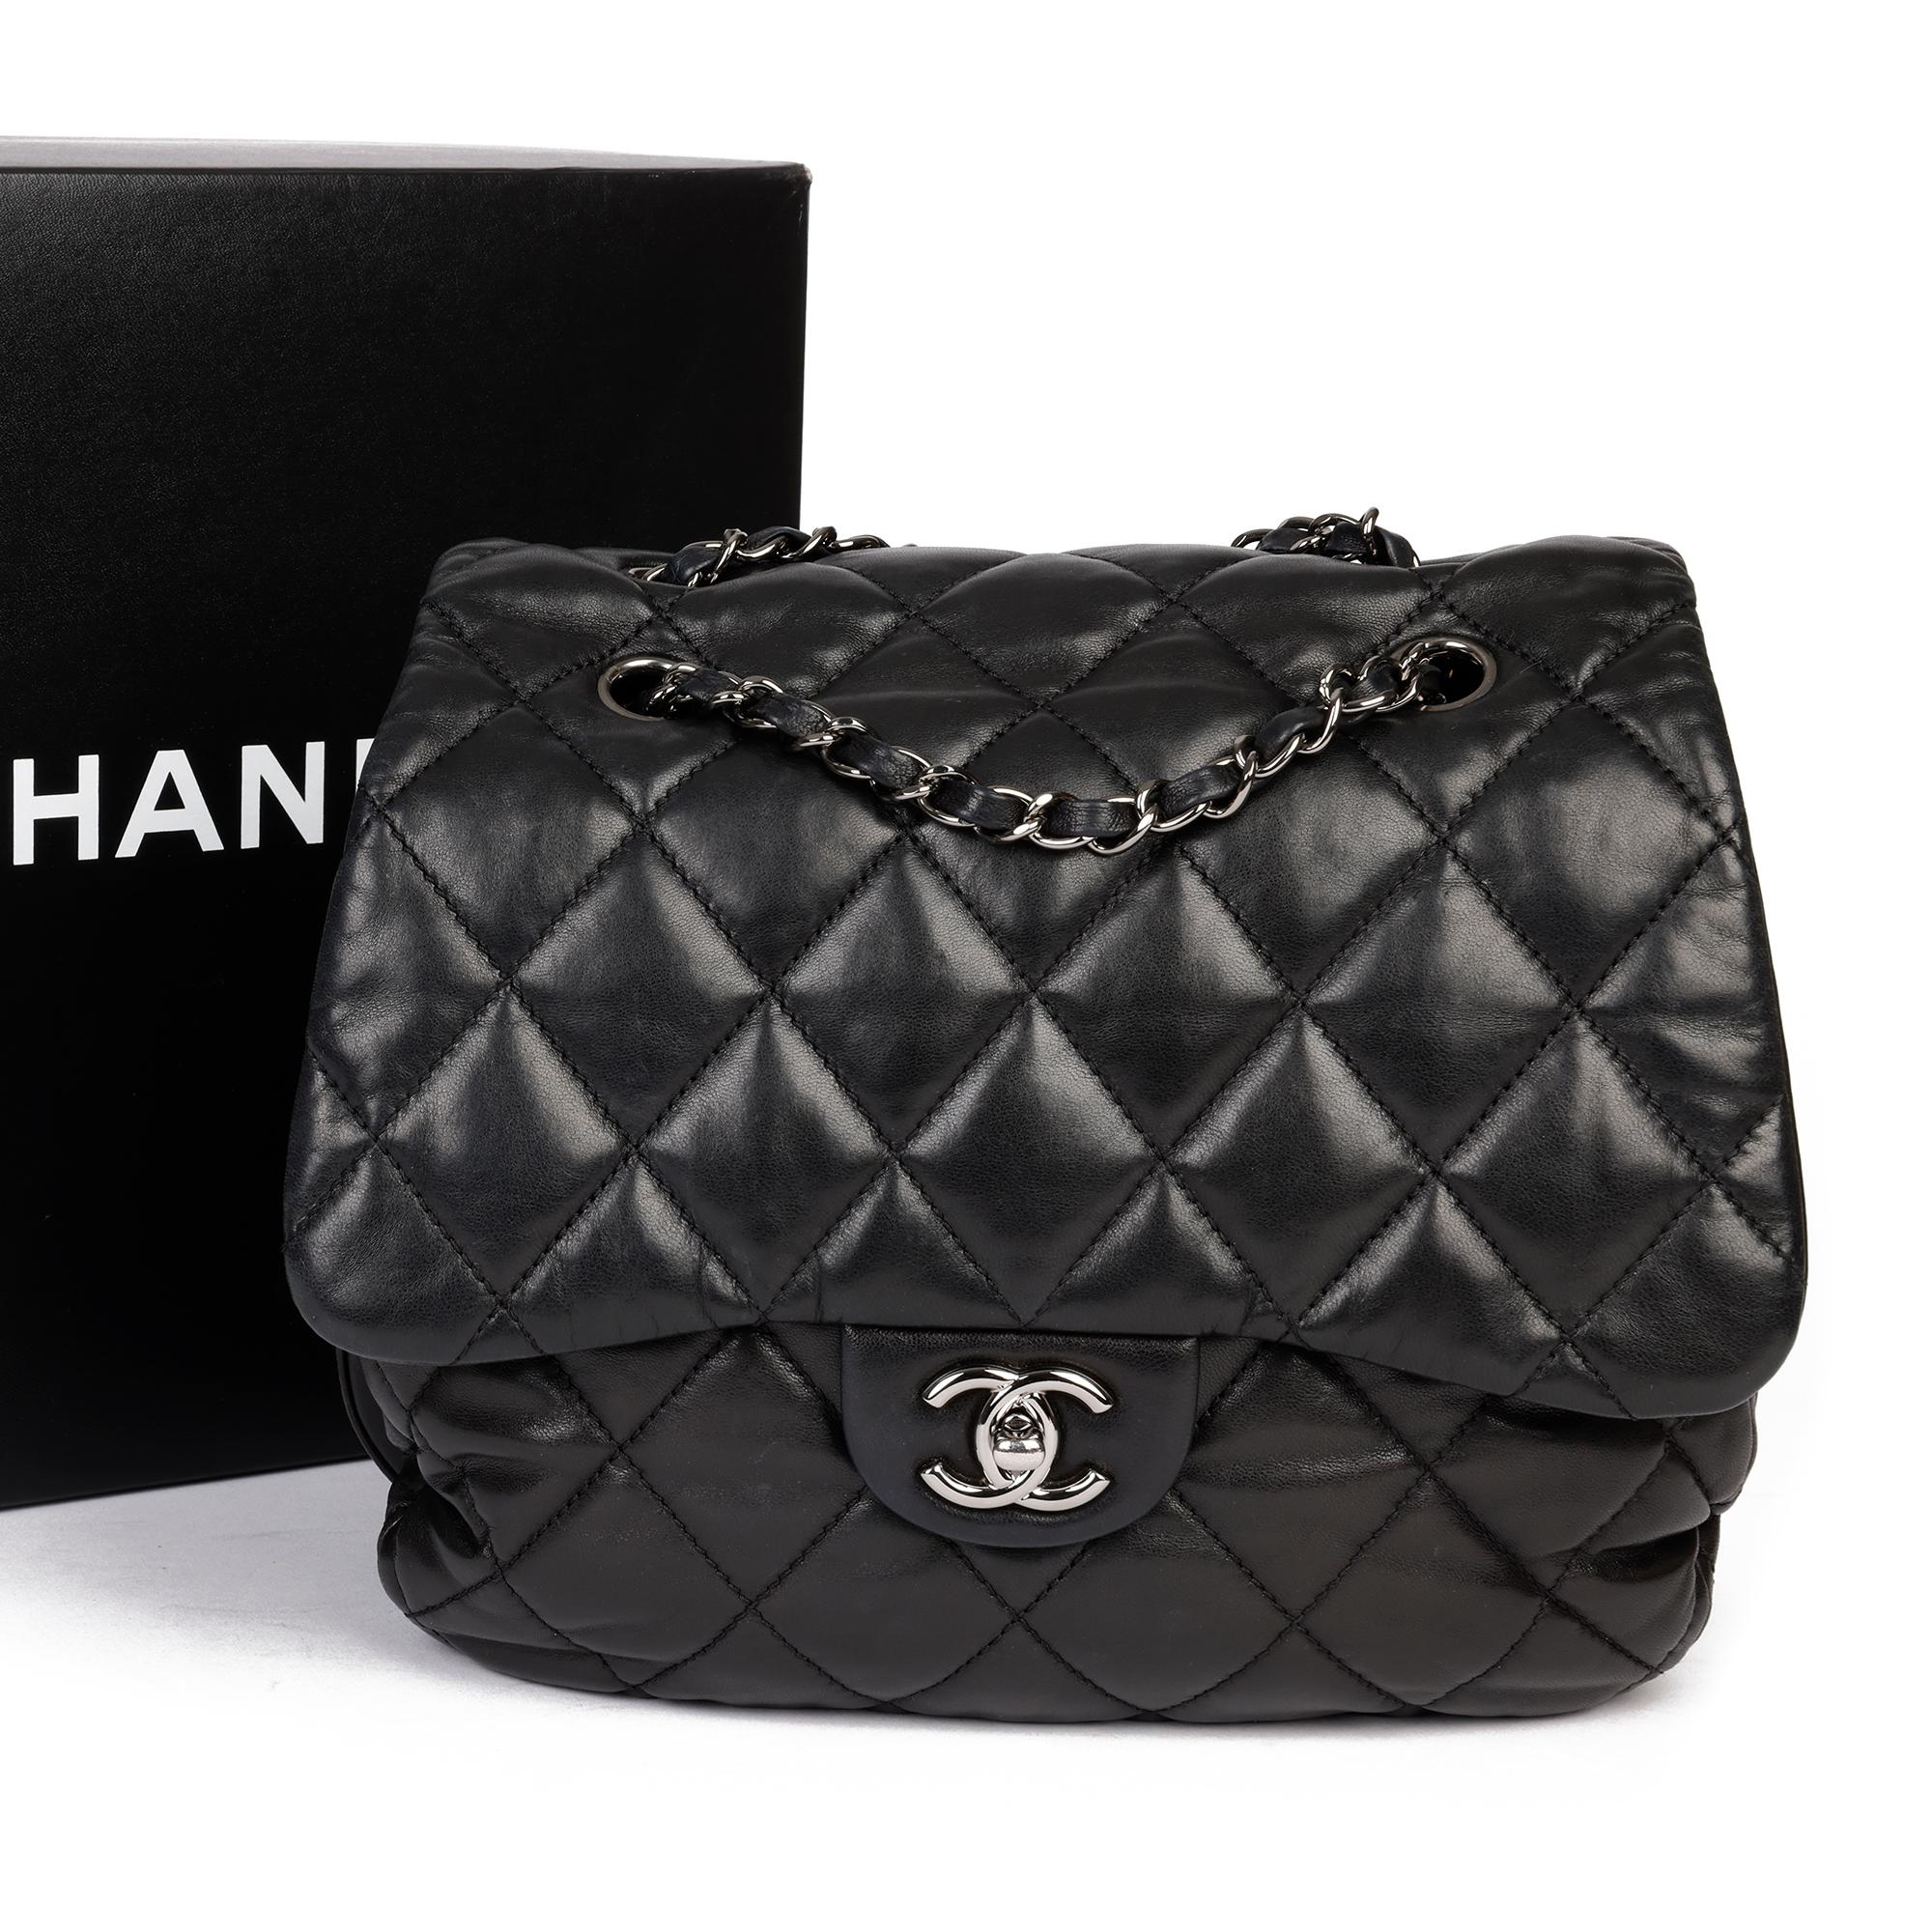 Chanel Black Quilted Lambskin Leather Triple Compartment Classic Single Flap Bag 8